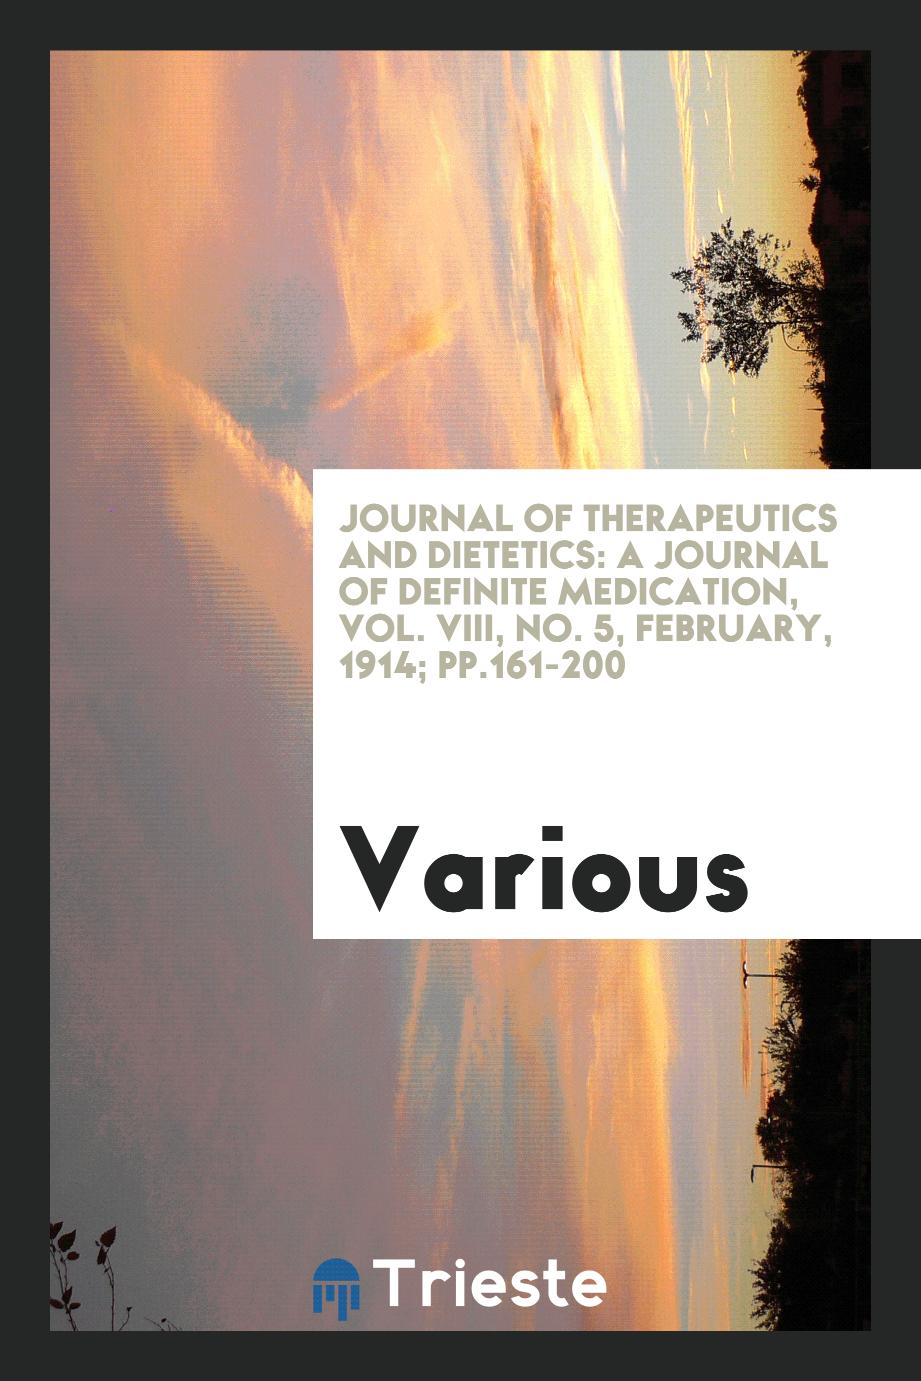 Journal of Therapeutics and Dietetics: a journal of definite medication, Vol. VIII, No. 5, february, 1914; pp.161-200